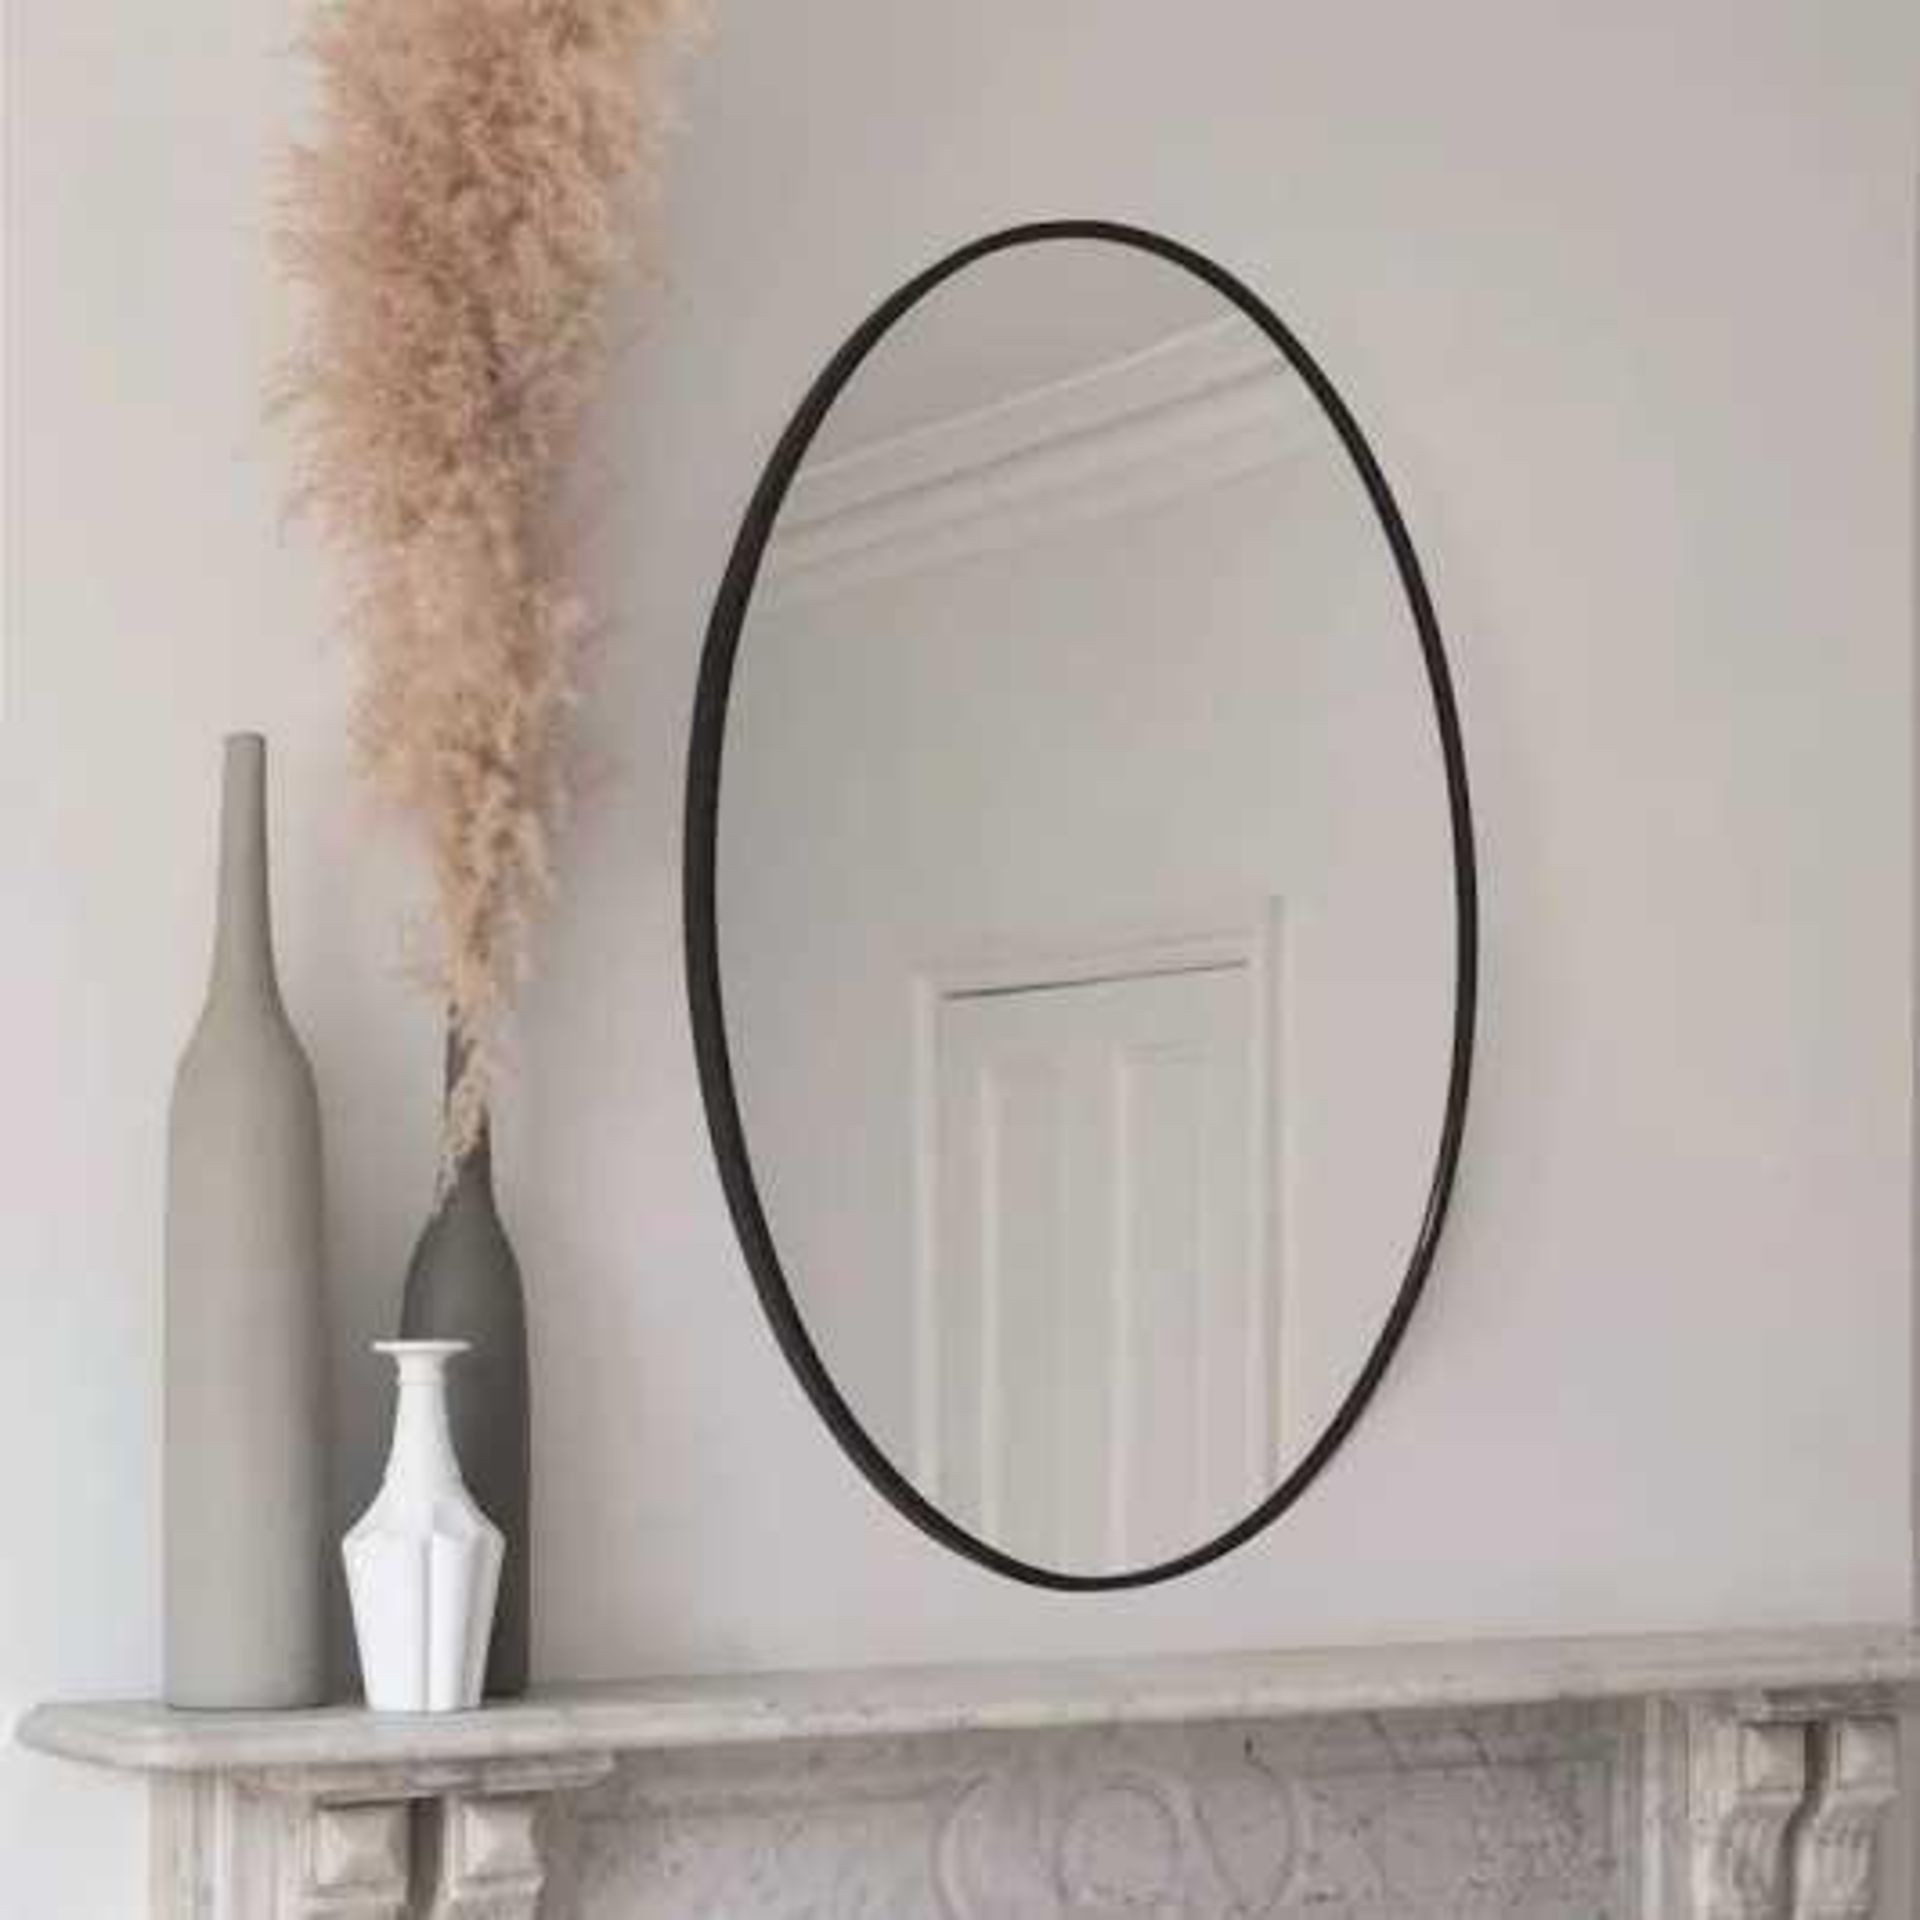 RRP £200 Contains 1 Boxed John Lewis Flat Edged Oval Mirror